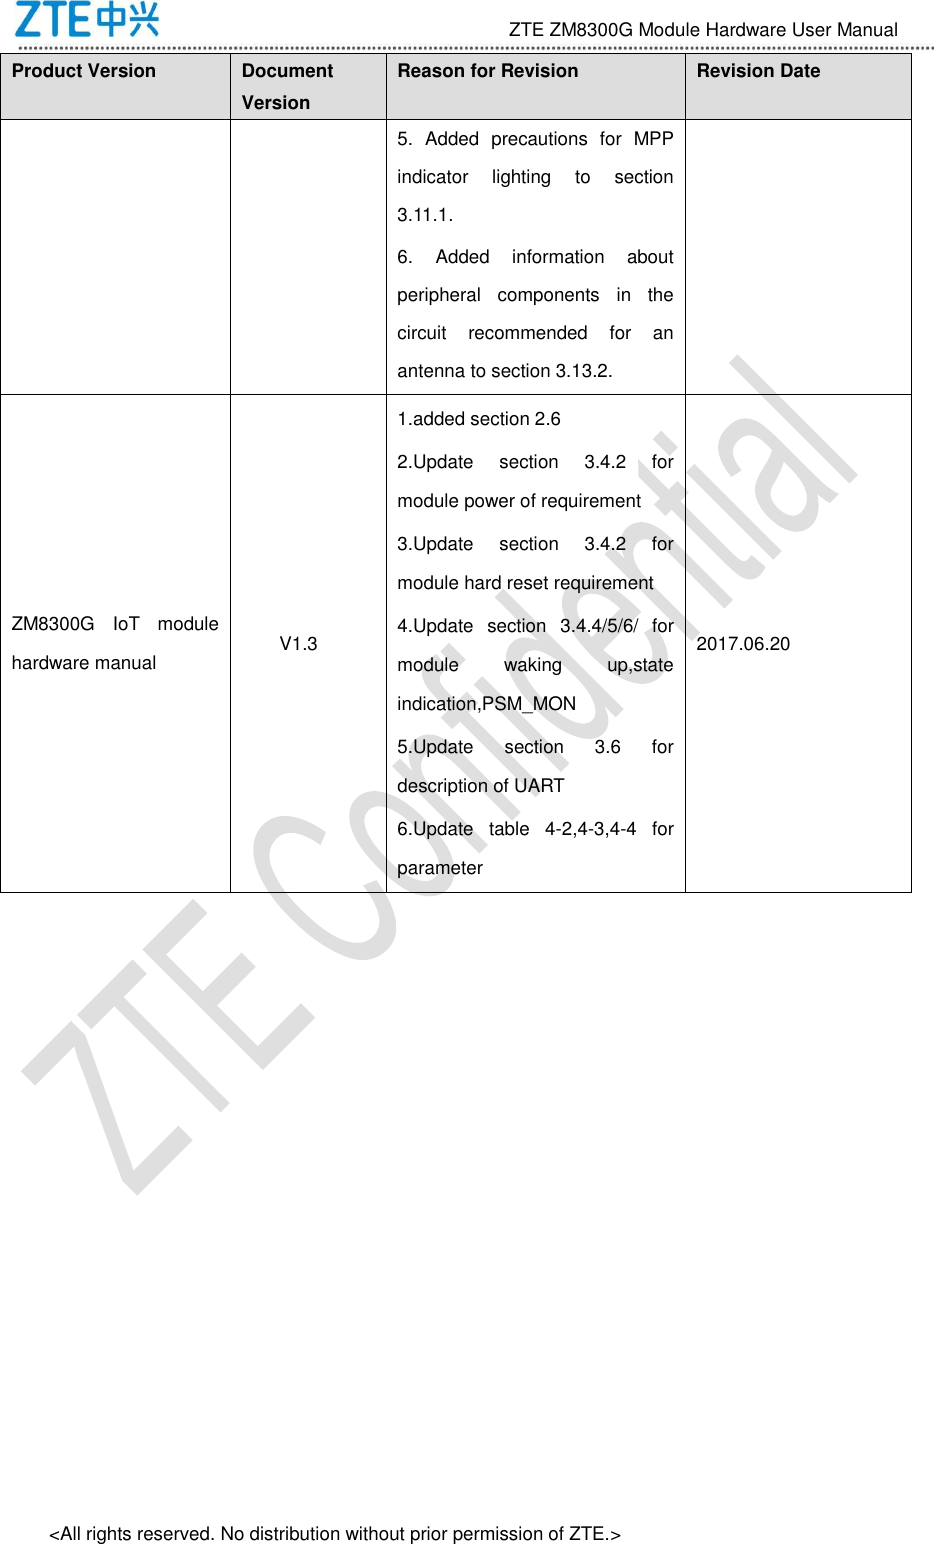                                 ZTE ZM8300G Module Hardware User Manual &lt;All rights reserved. No distribution without prior permission of ZTE.&gt; Product Version Document Version Reason for Revision Revision Date 5.  Added  precautions  for  MPP indicator  lighting  to  section 3.11.1. 6.  Added  information  about peripheral  components  in  the circuit  recommended  for  an antenna to section 3.13.2. ZM8300G  IoT  module hardware manual         V1.3 1.added section 2.6 2.Update  section  3.4.2  for module power of requirement 3.Update  section  3.4.2  for module hard reset requirement 4.Update  section  3.4.4/5/6/  for module  waking  up,state indication,PSM_MON 5.Update  section  3.6  for description of UART 6.Update  table  4-2,4-3,4-4  for parameter 2017.06.20  